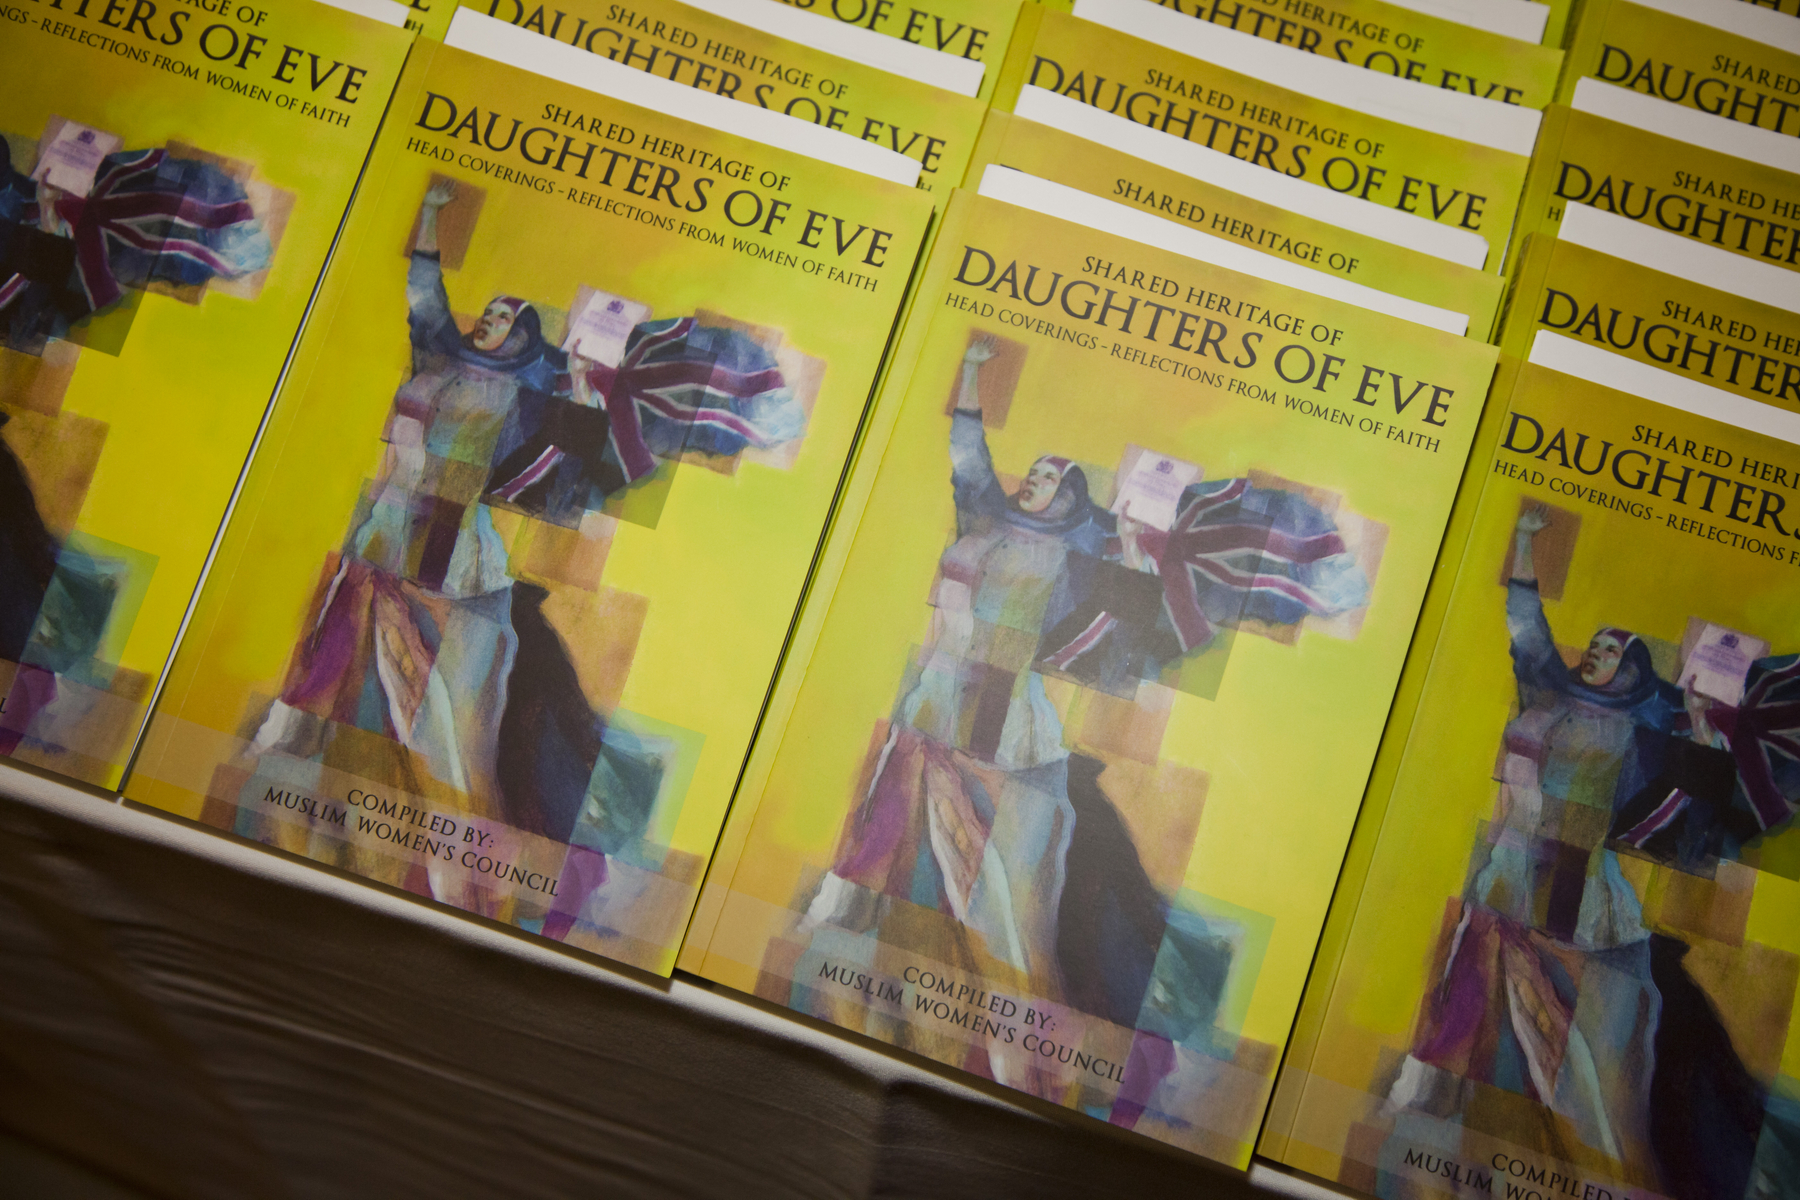 Shared heritage of daughters of eve book